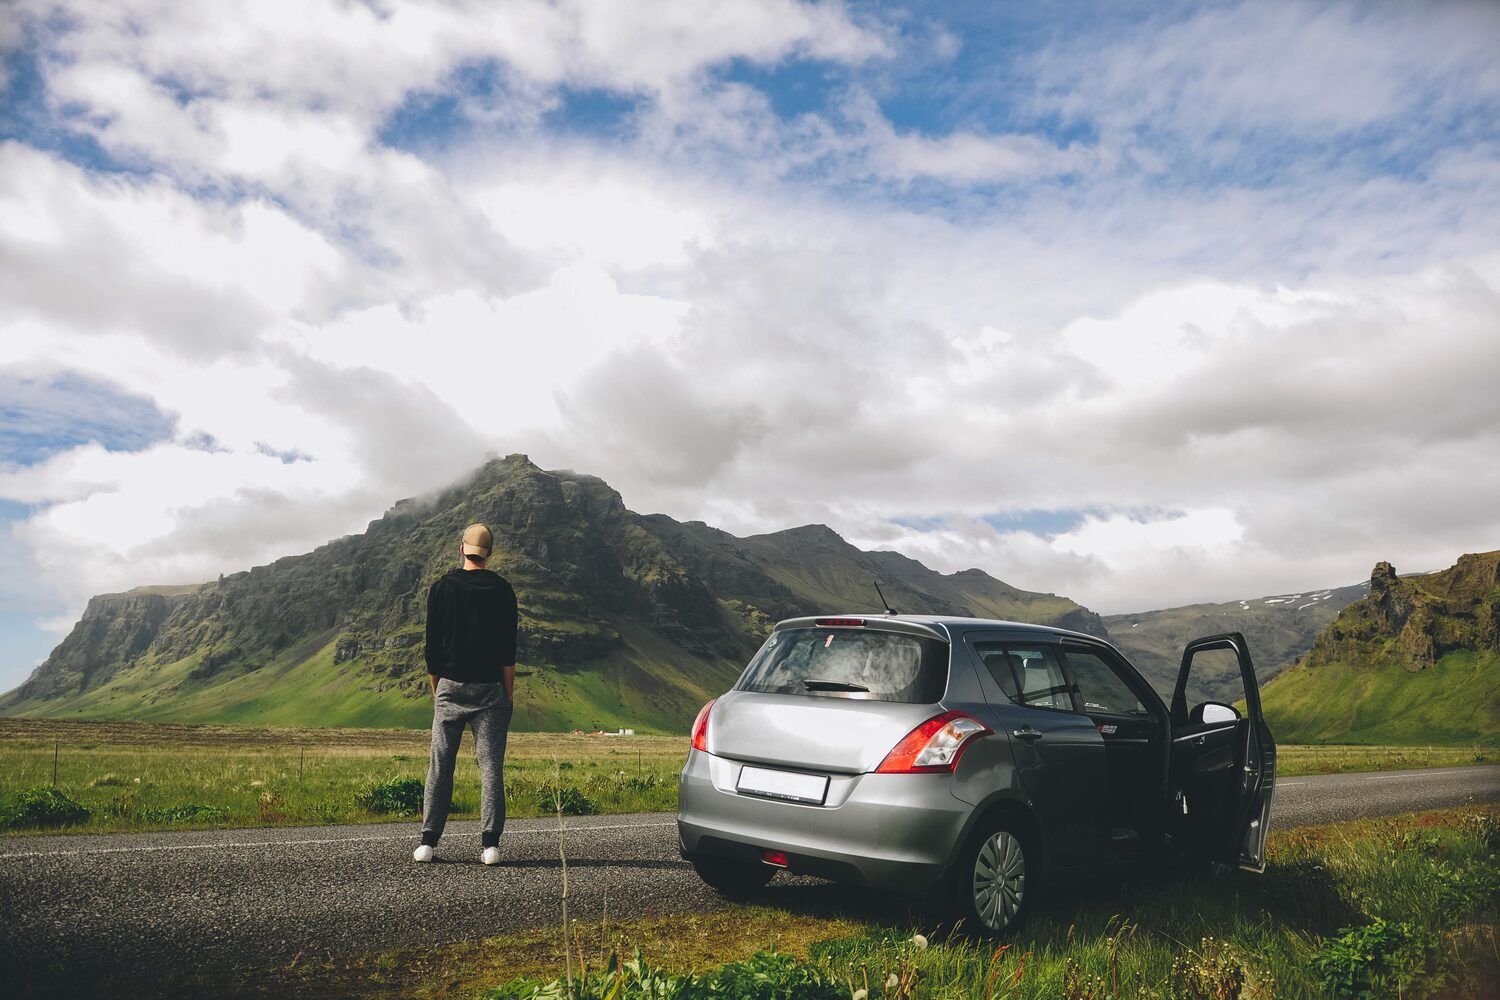 Man looking out to a mountain in Iceland, next to car on road from a scenic route.